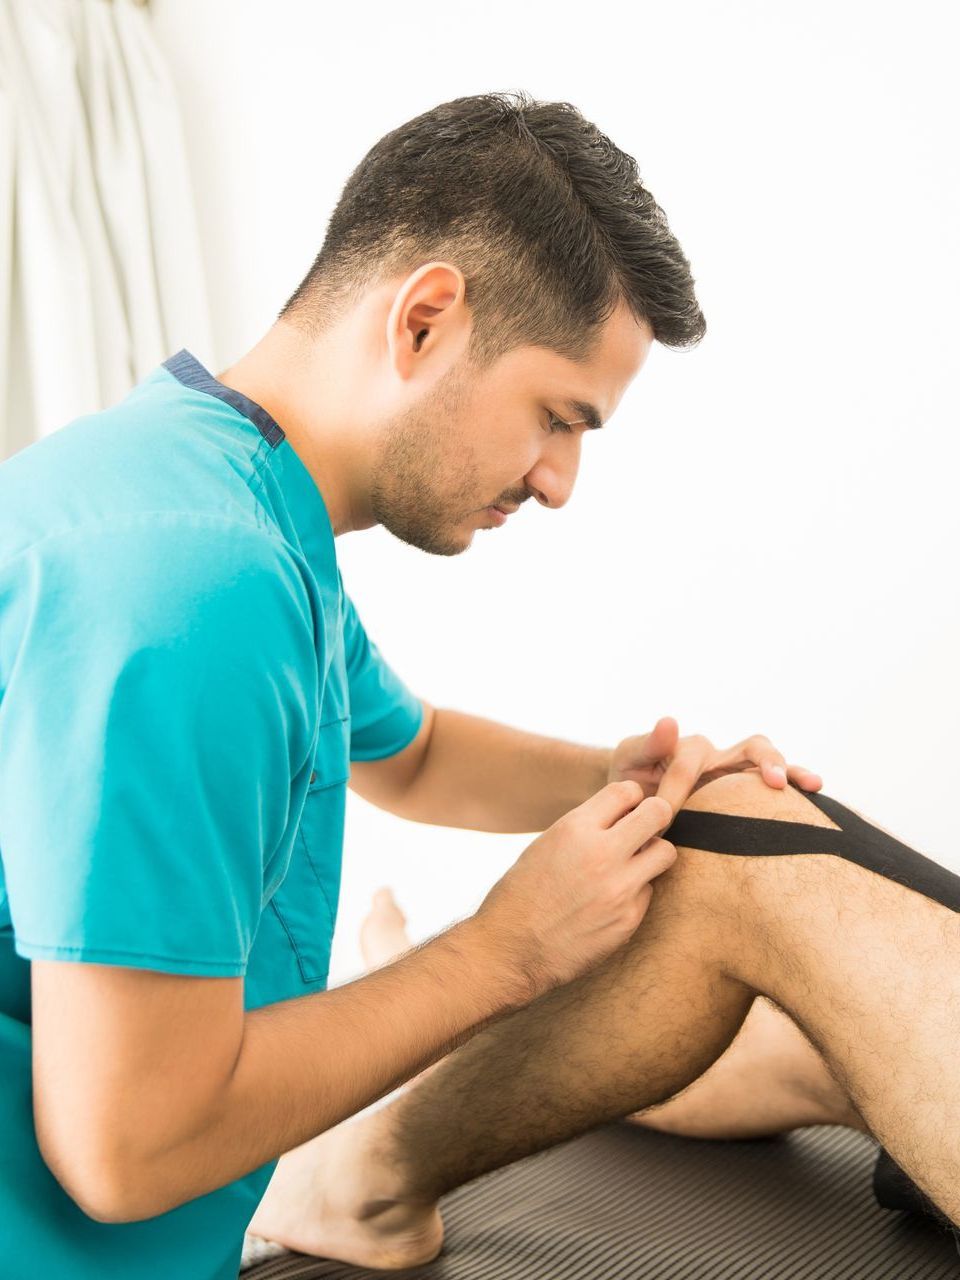 a man in a blue shirt is applying kinesio tape to a man 's knee